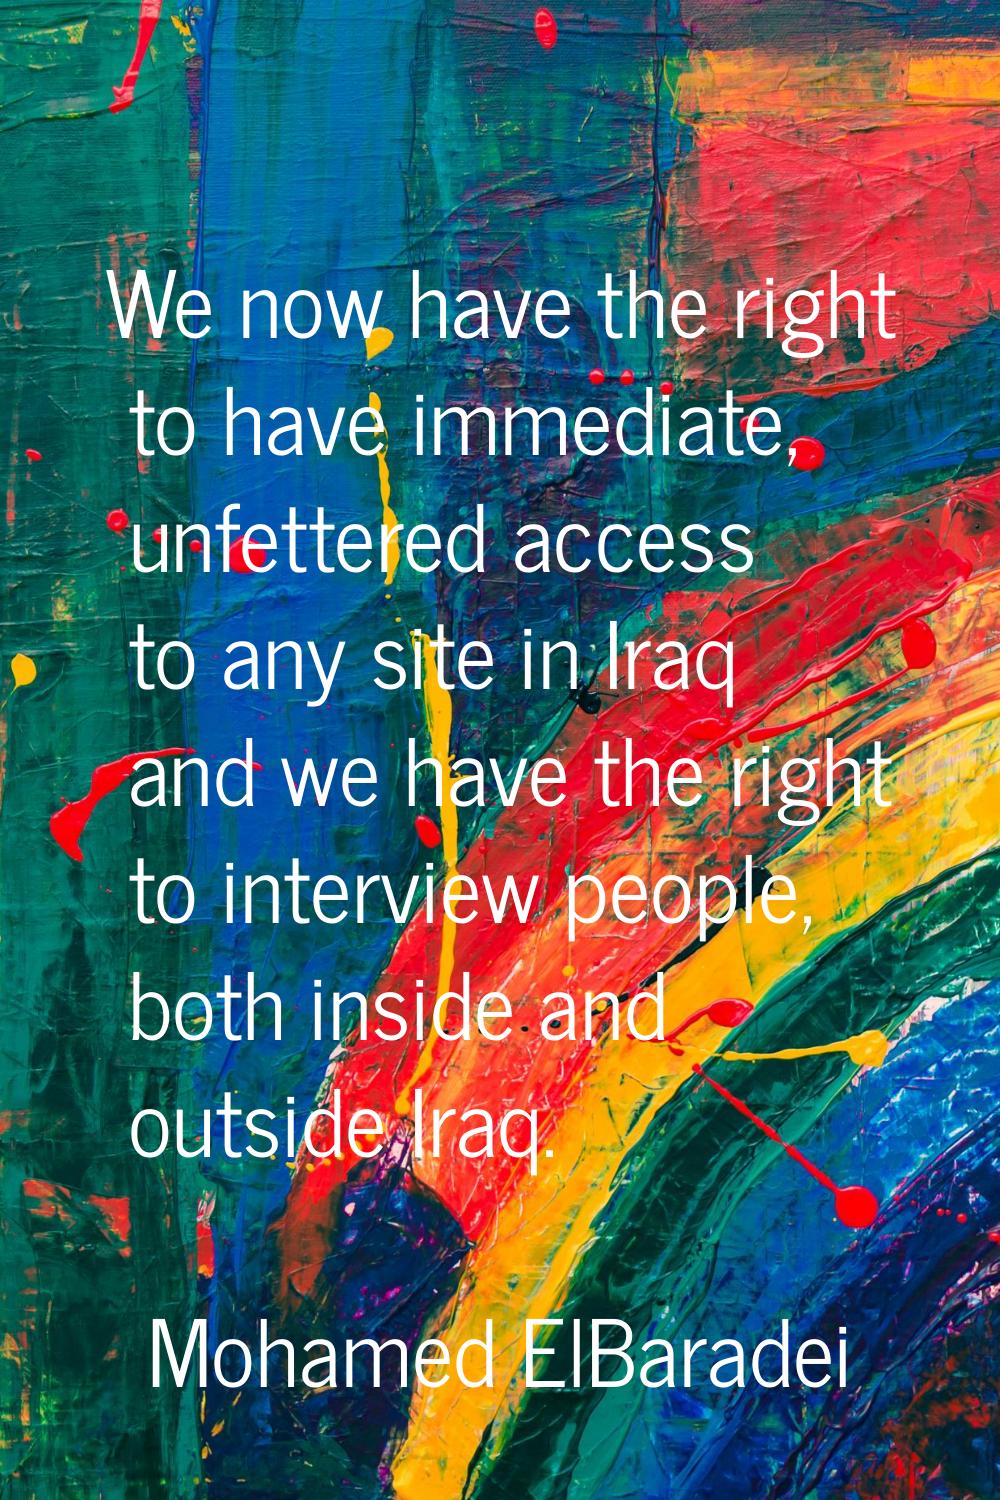 We now have the right to have immediate, unfettered access to any site in Iraq and we have the righ